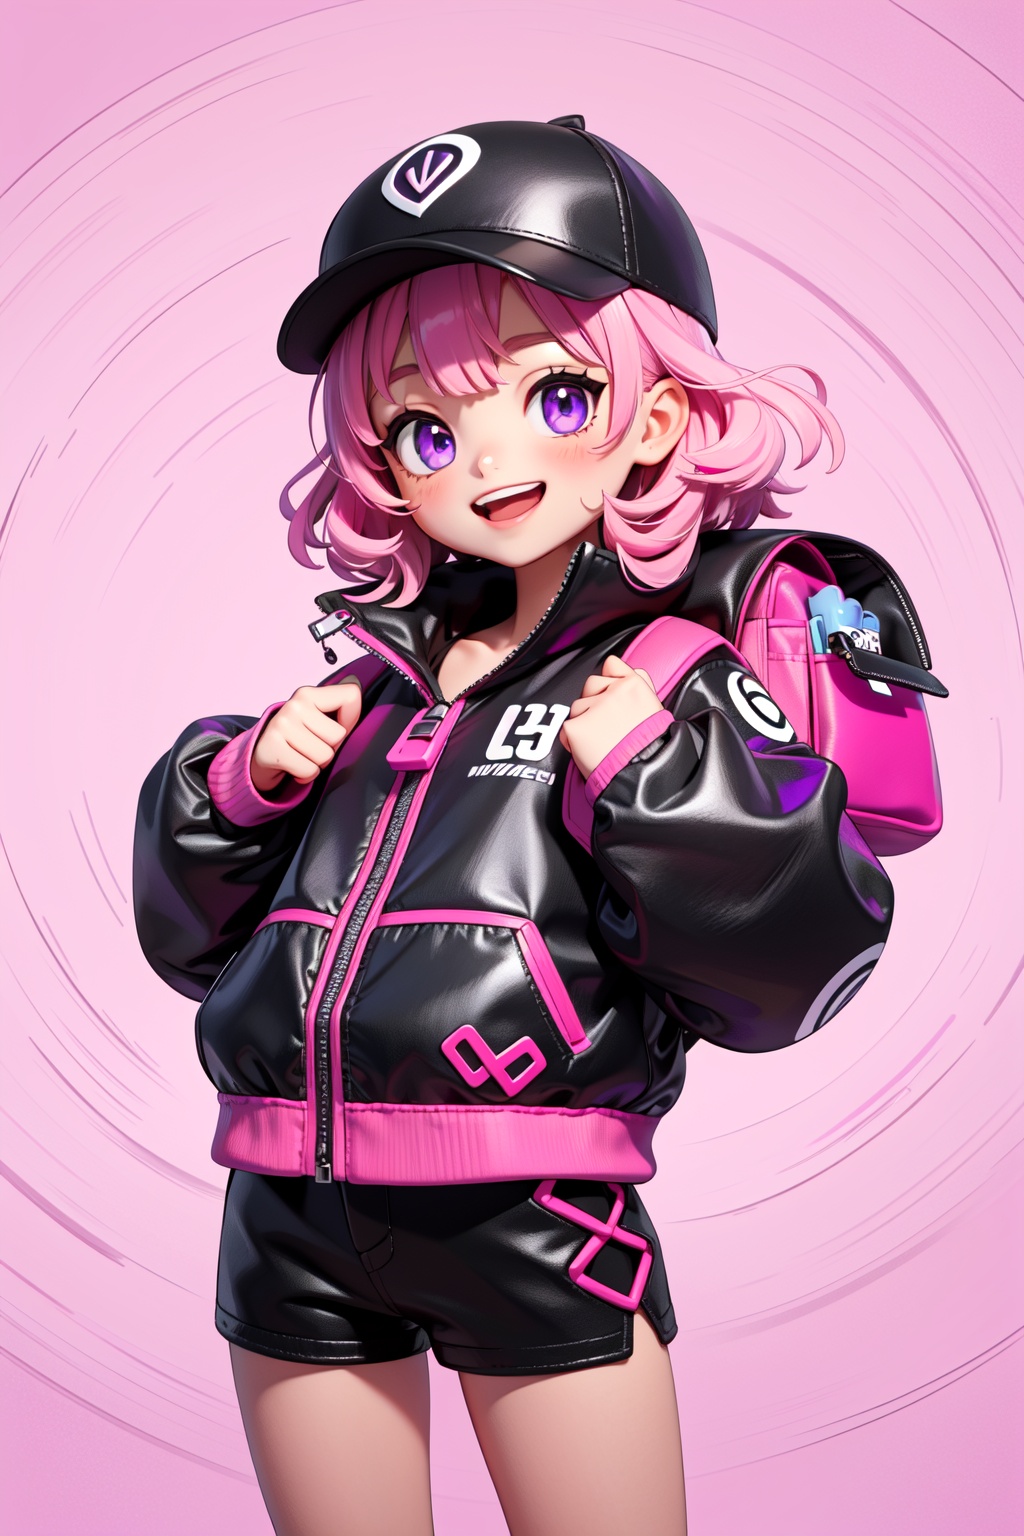 ( 1girl is happy and laughing) ((Pure purple and pink background:1.2)),A girl ready for a day of gaming,her dark curly hair adorned with a cap,carries a loaded backpack. Her black jacket and shorts combination is complemented by gaming motifs,suggesting a dedicated gamer lifestyle.,, masterpiece,best quality,very aesthetic,absurdres,